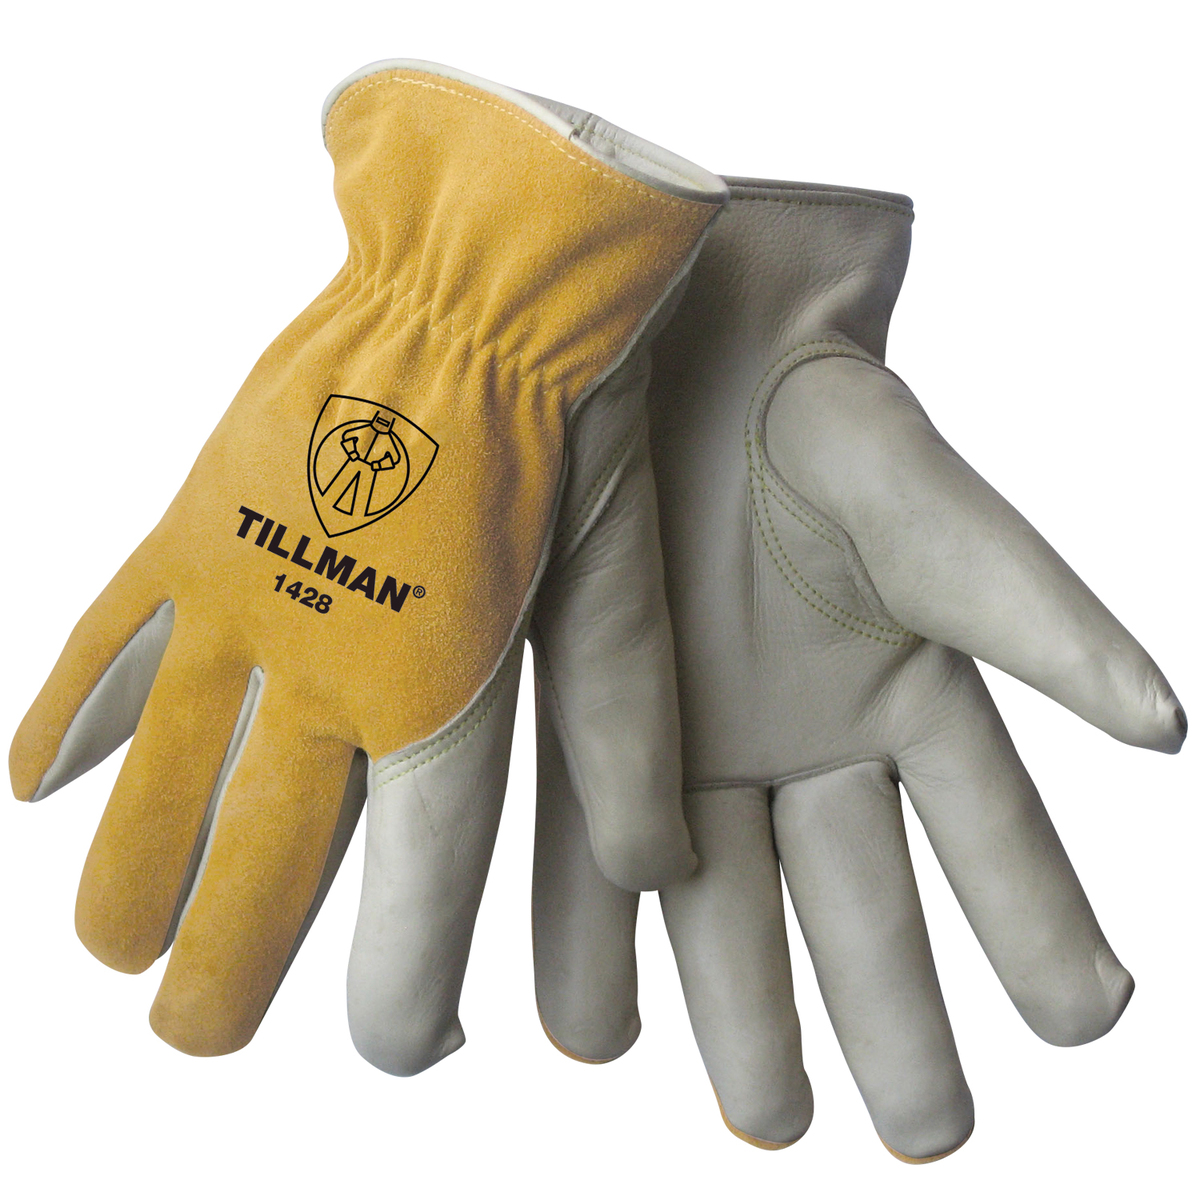 Drivers Gloves for sale online